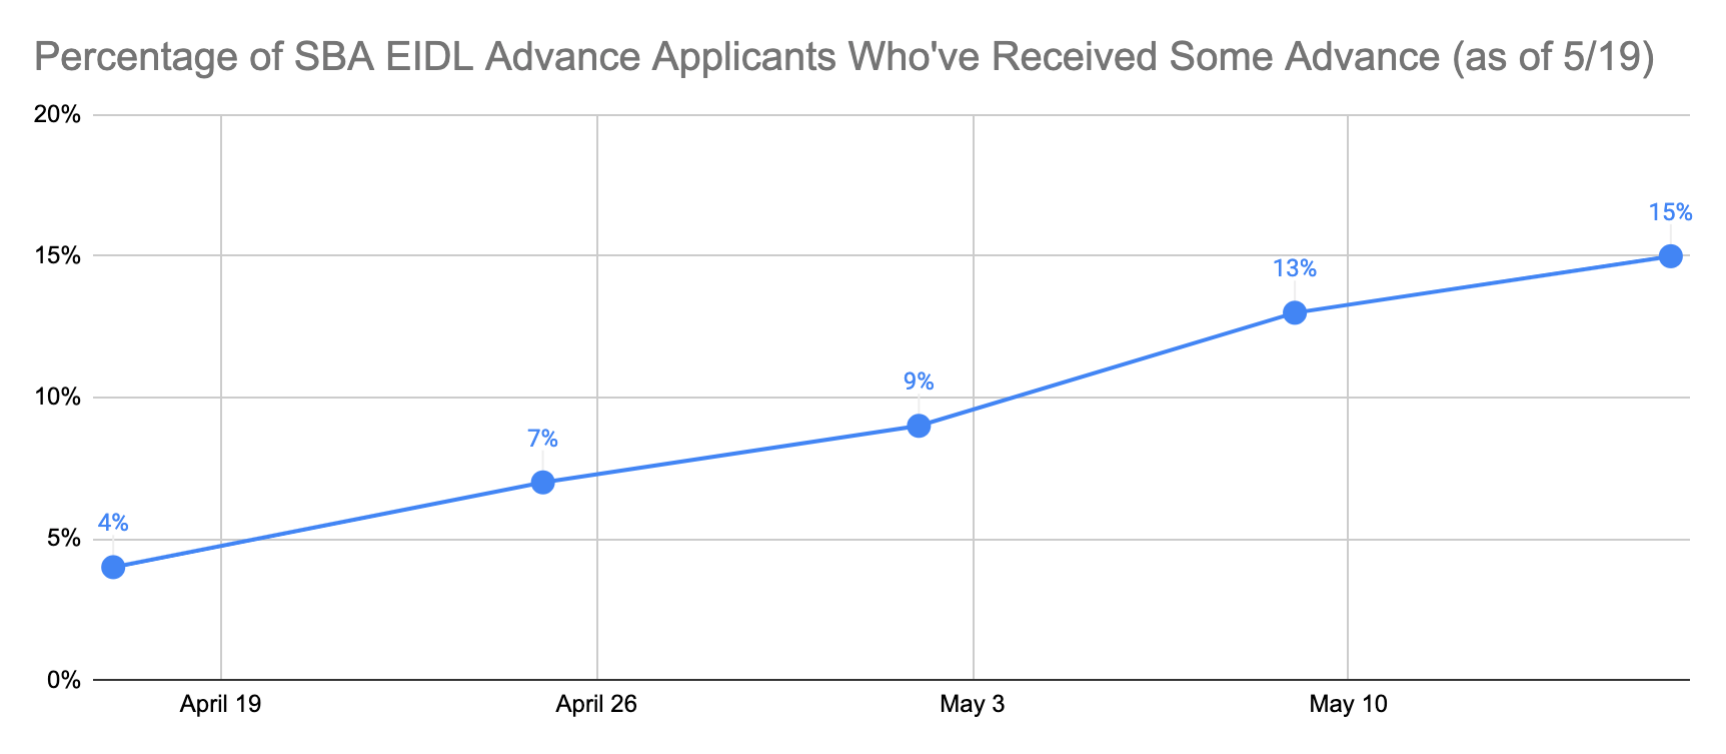 https://ghost.helloskip.com/blog/content/images/2020/05/Percentage-of-SBA-EIDL-Advance-Applicants-Who-ve-Received-Some-Advance-Money.png